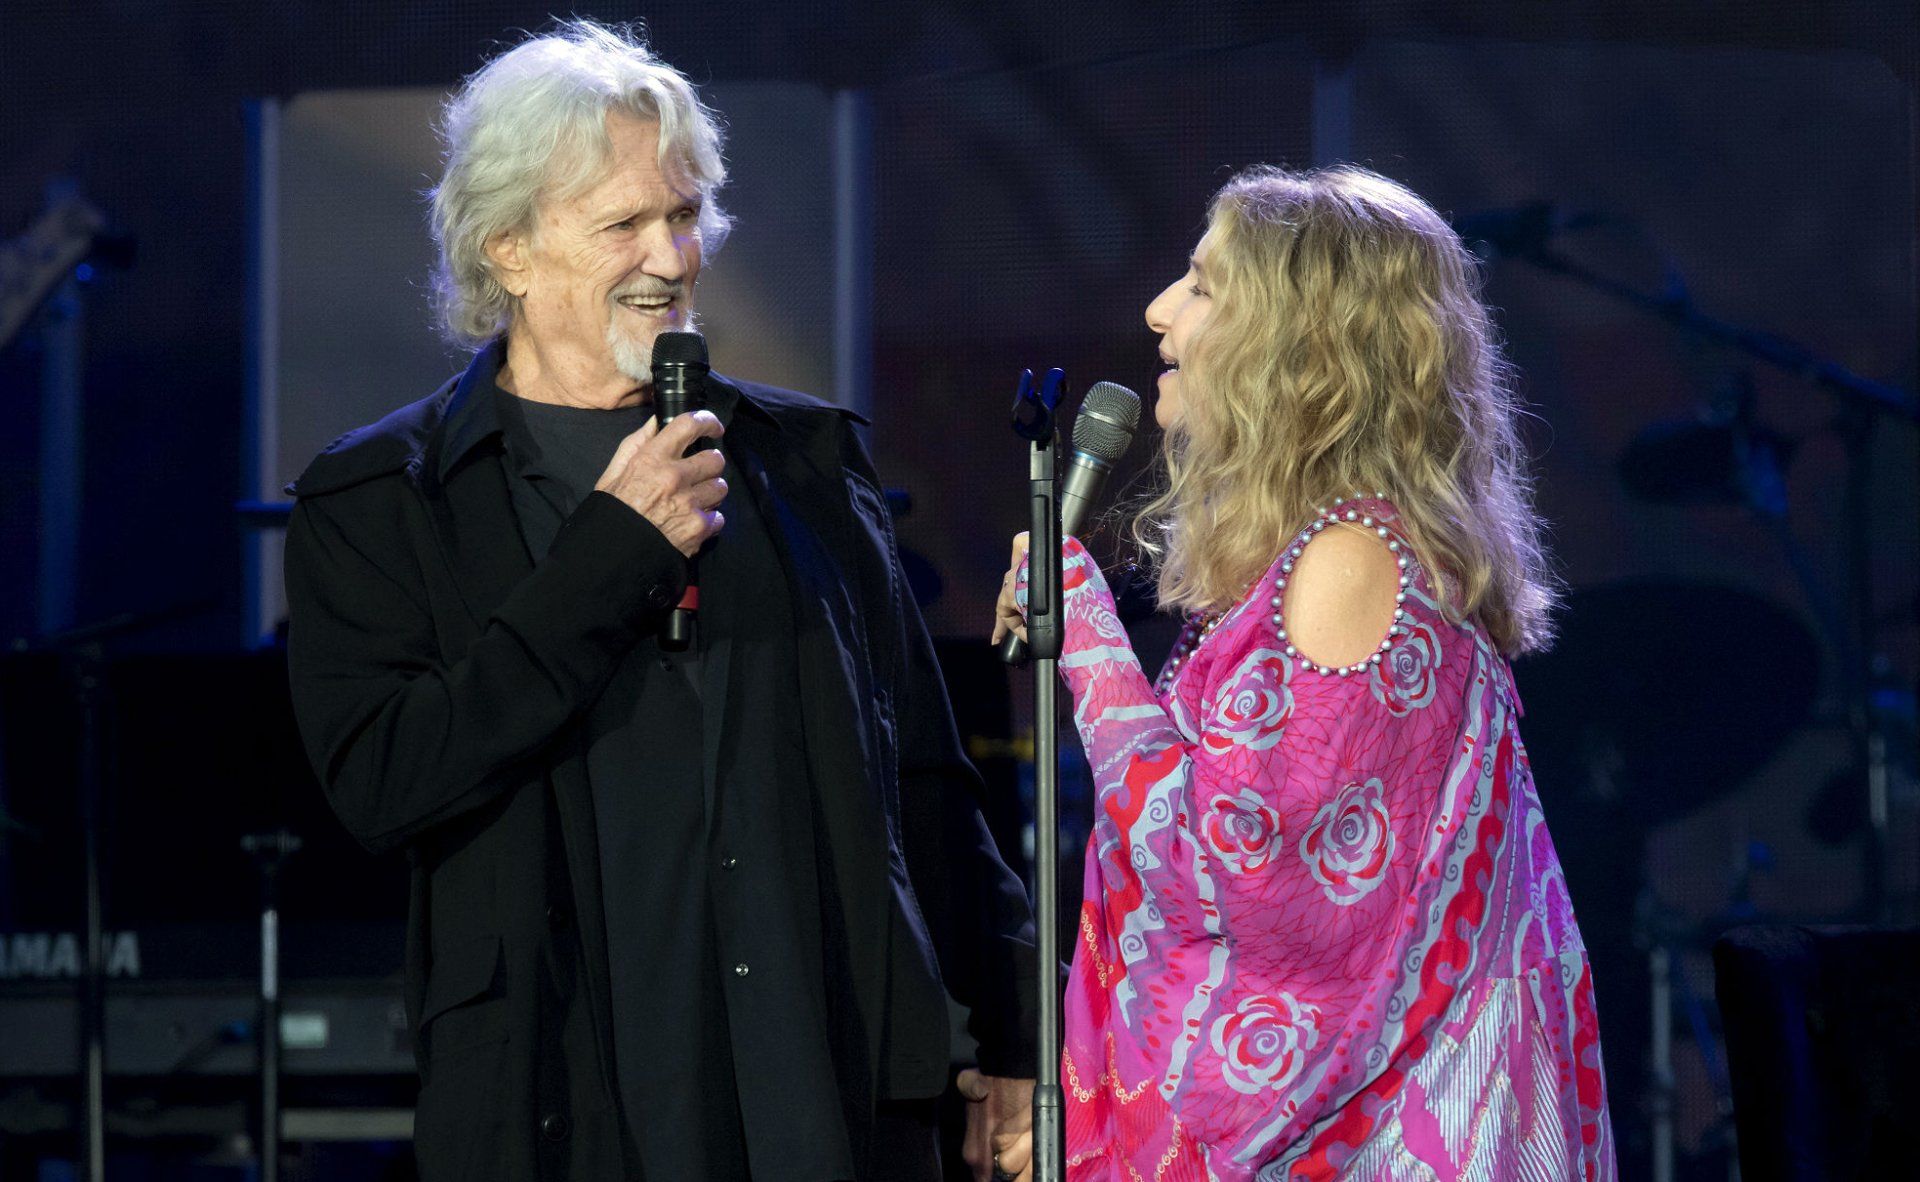 Kris Kristofferson and Barbra Streisand sing together at Hyde Park.  Photo by Dave J Hogan